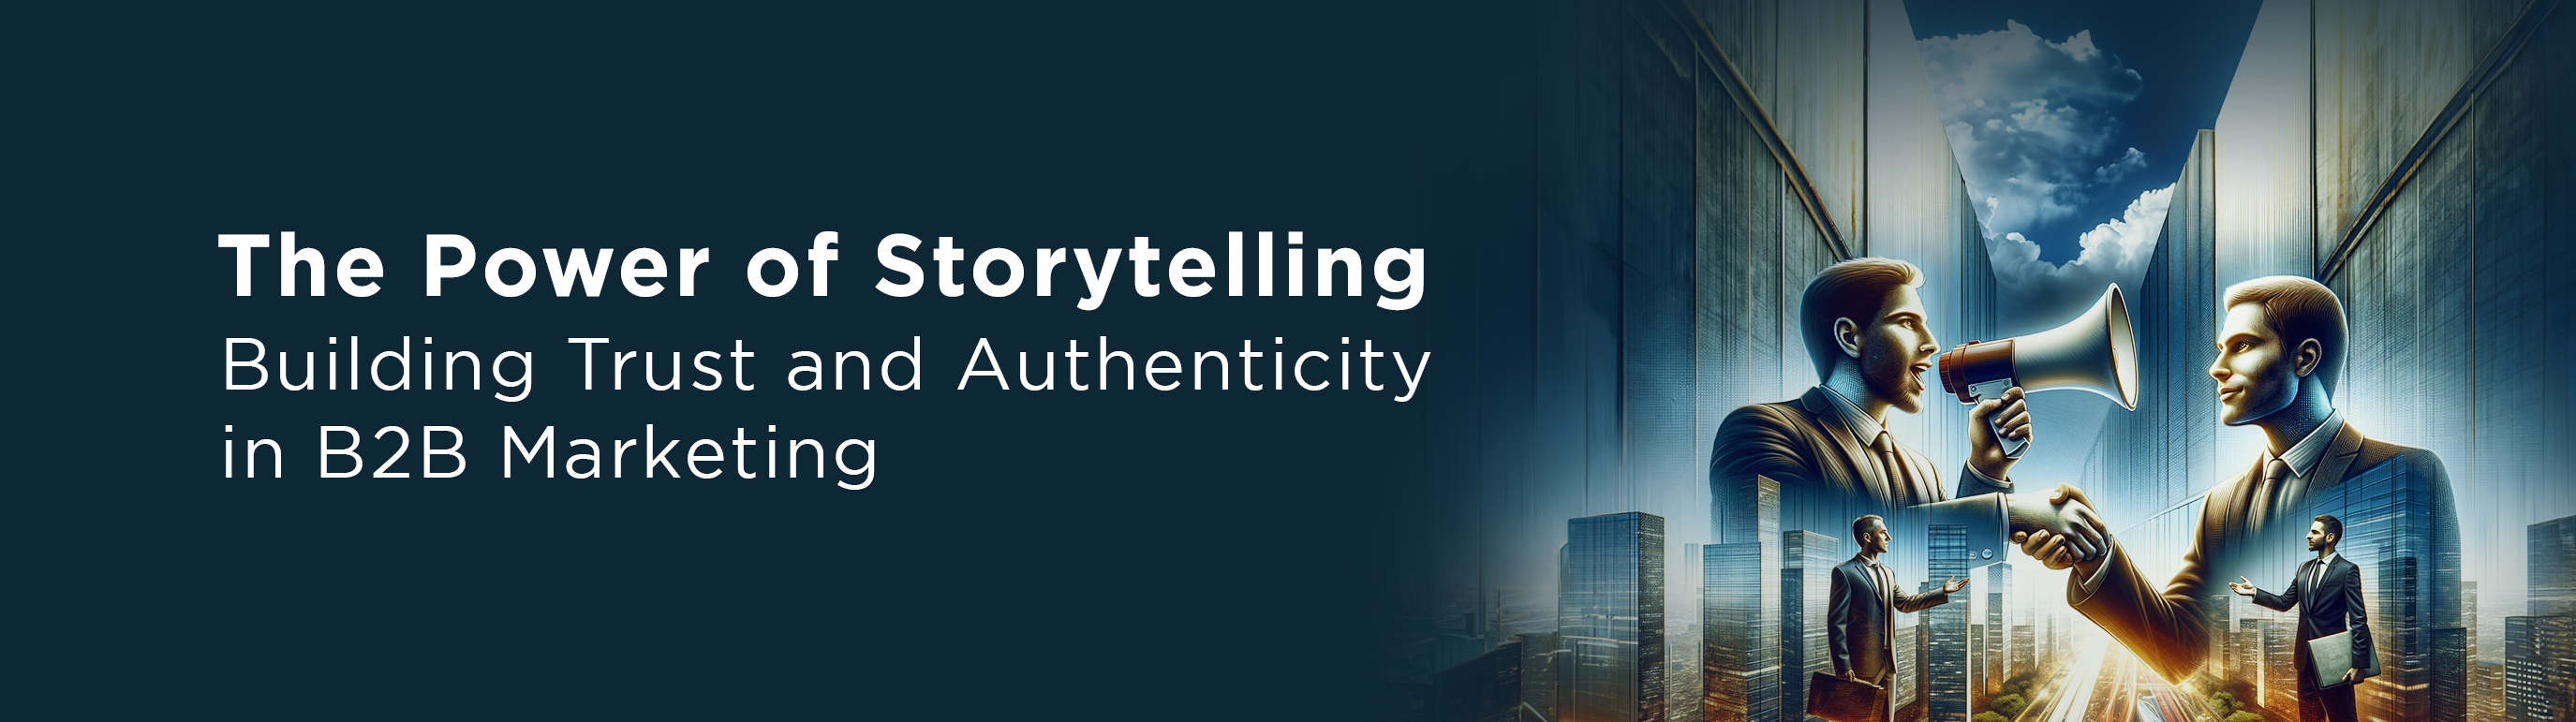 Building Trust and Authenticity in B2B Marketing: The Power of Storytelling